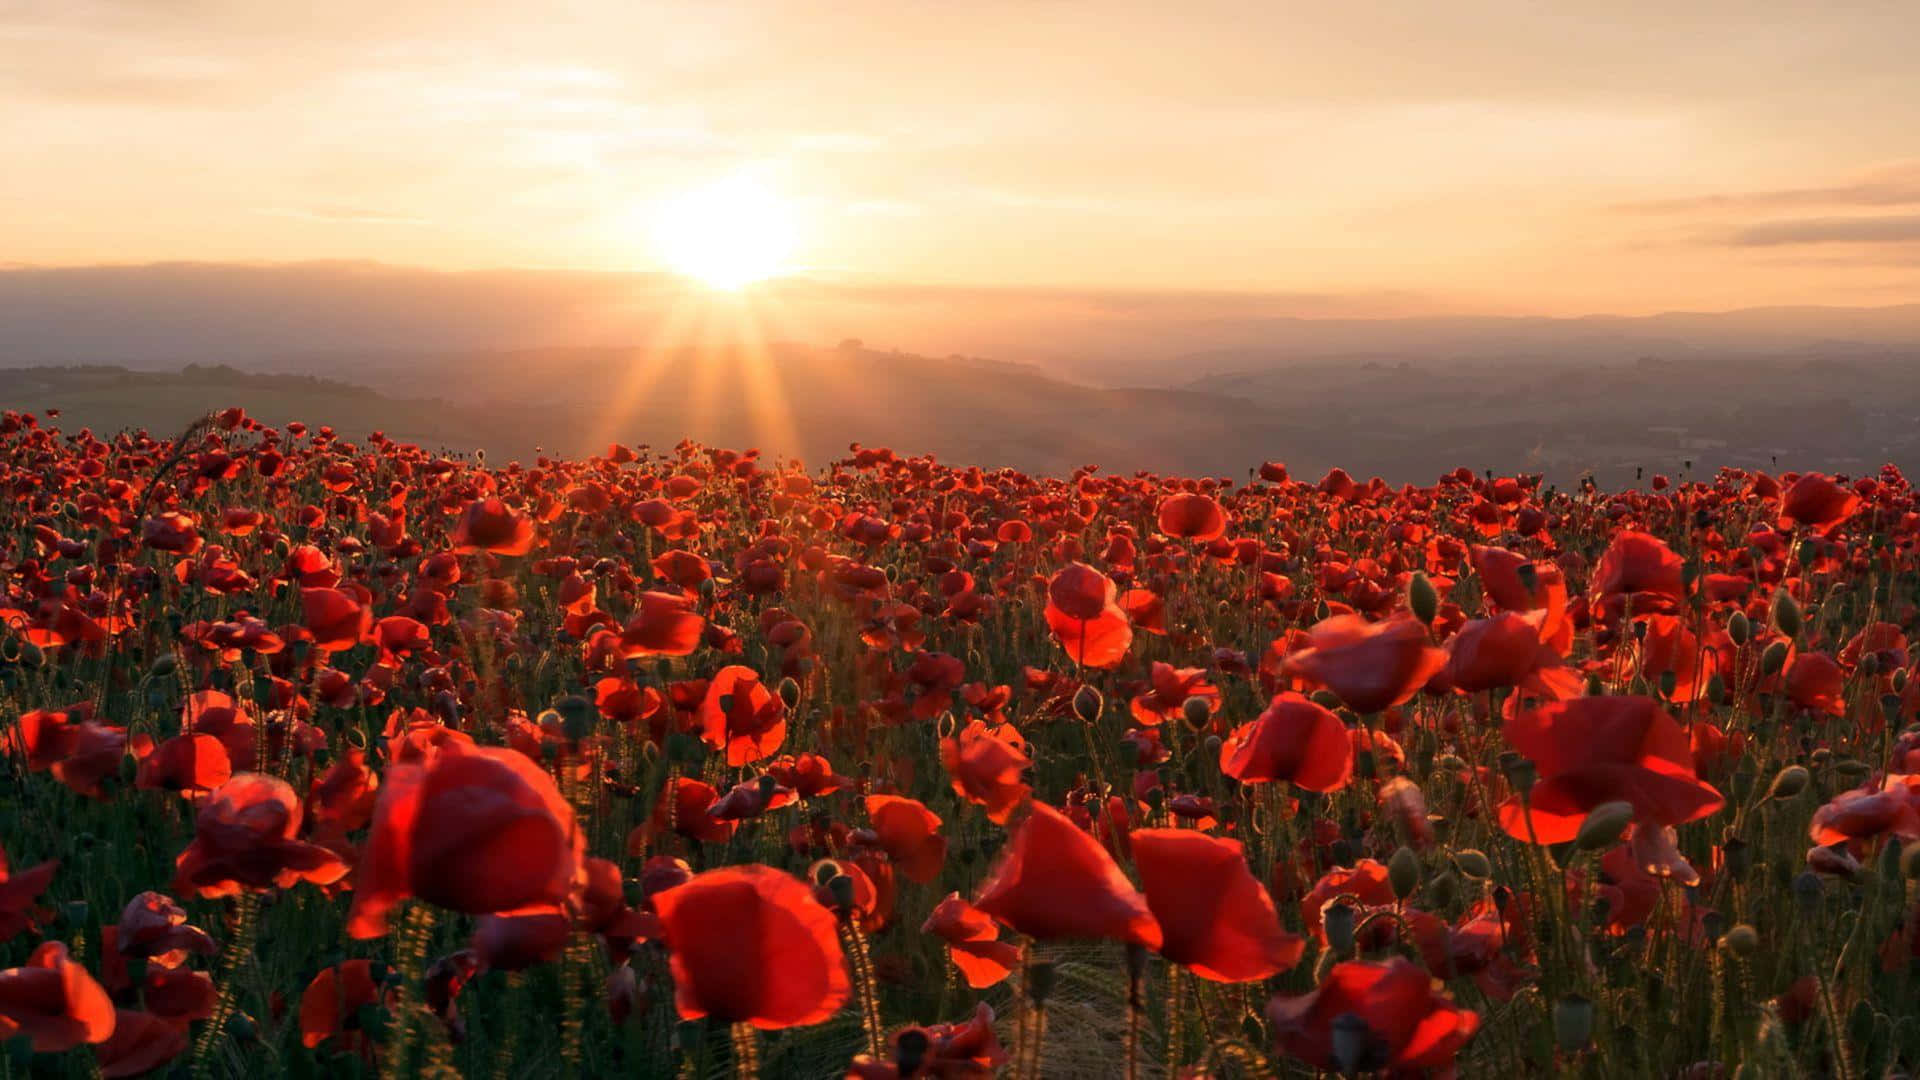 Download A field of vibrant and colorful poppies in bloom | Wallpapers.com